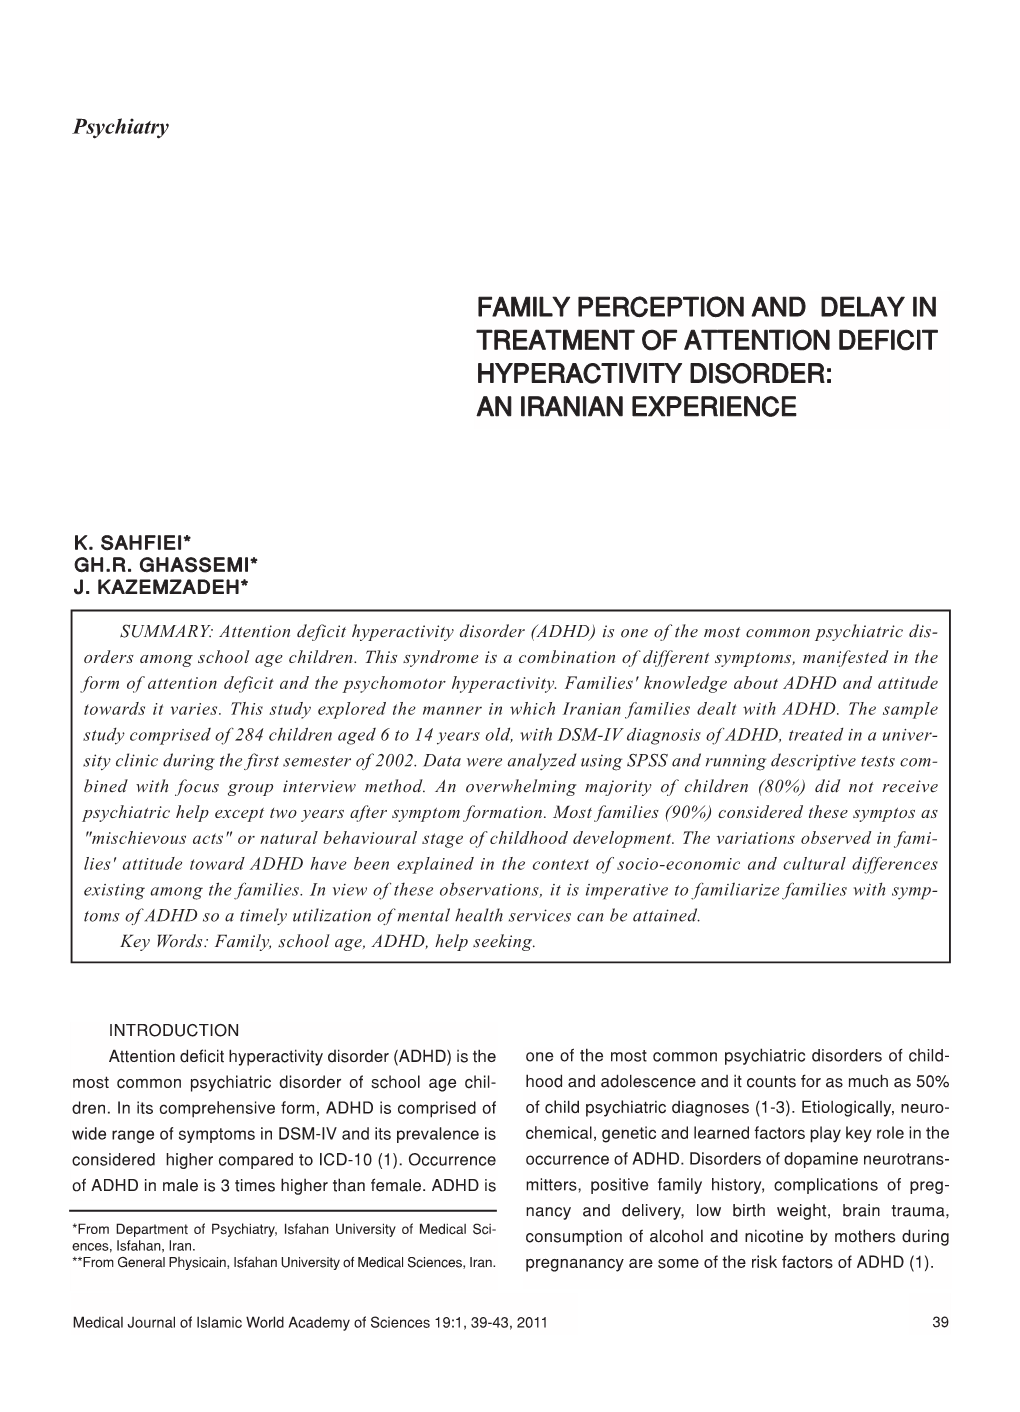 Family Perception and Delay in Treatment of Attention Deficit Hyperactivity Disorder: an Iranian Experience